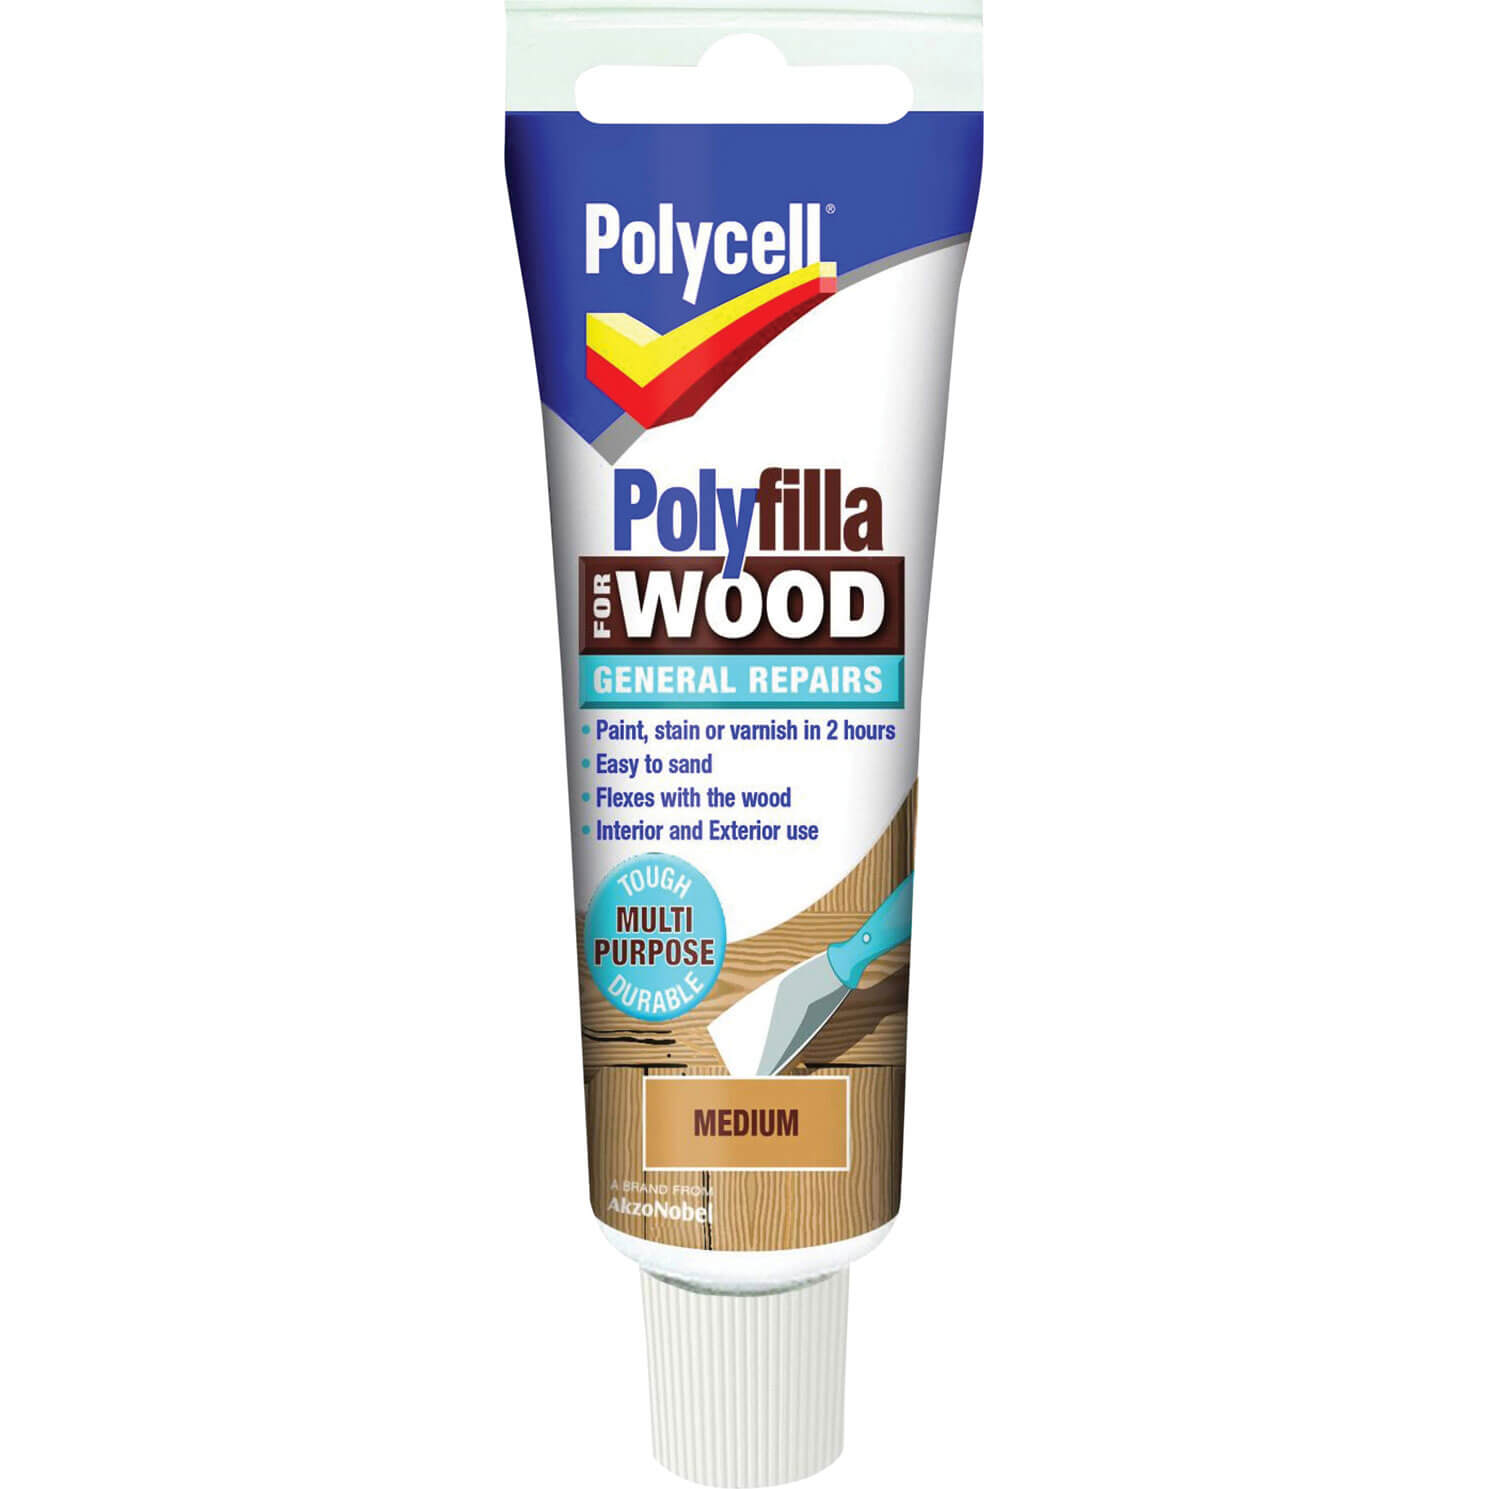 Image of Polycell Polyfilla for Wood General Repairs Medium 330g